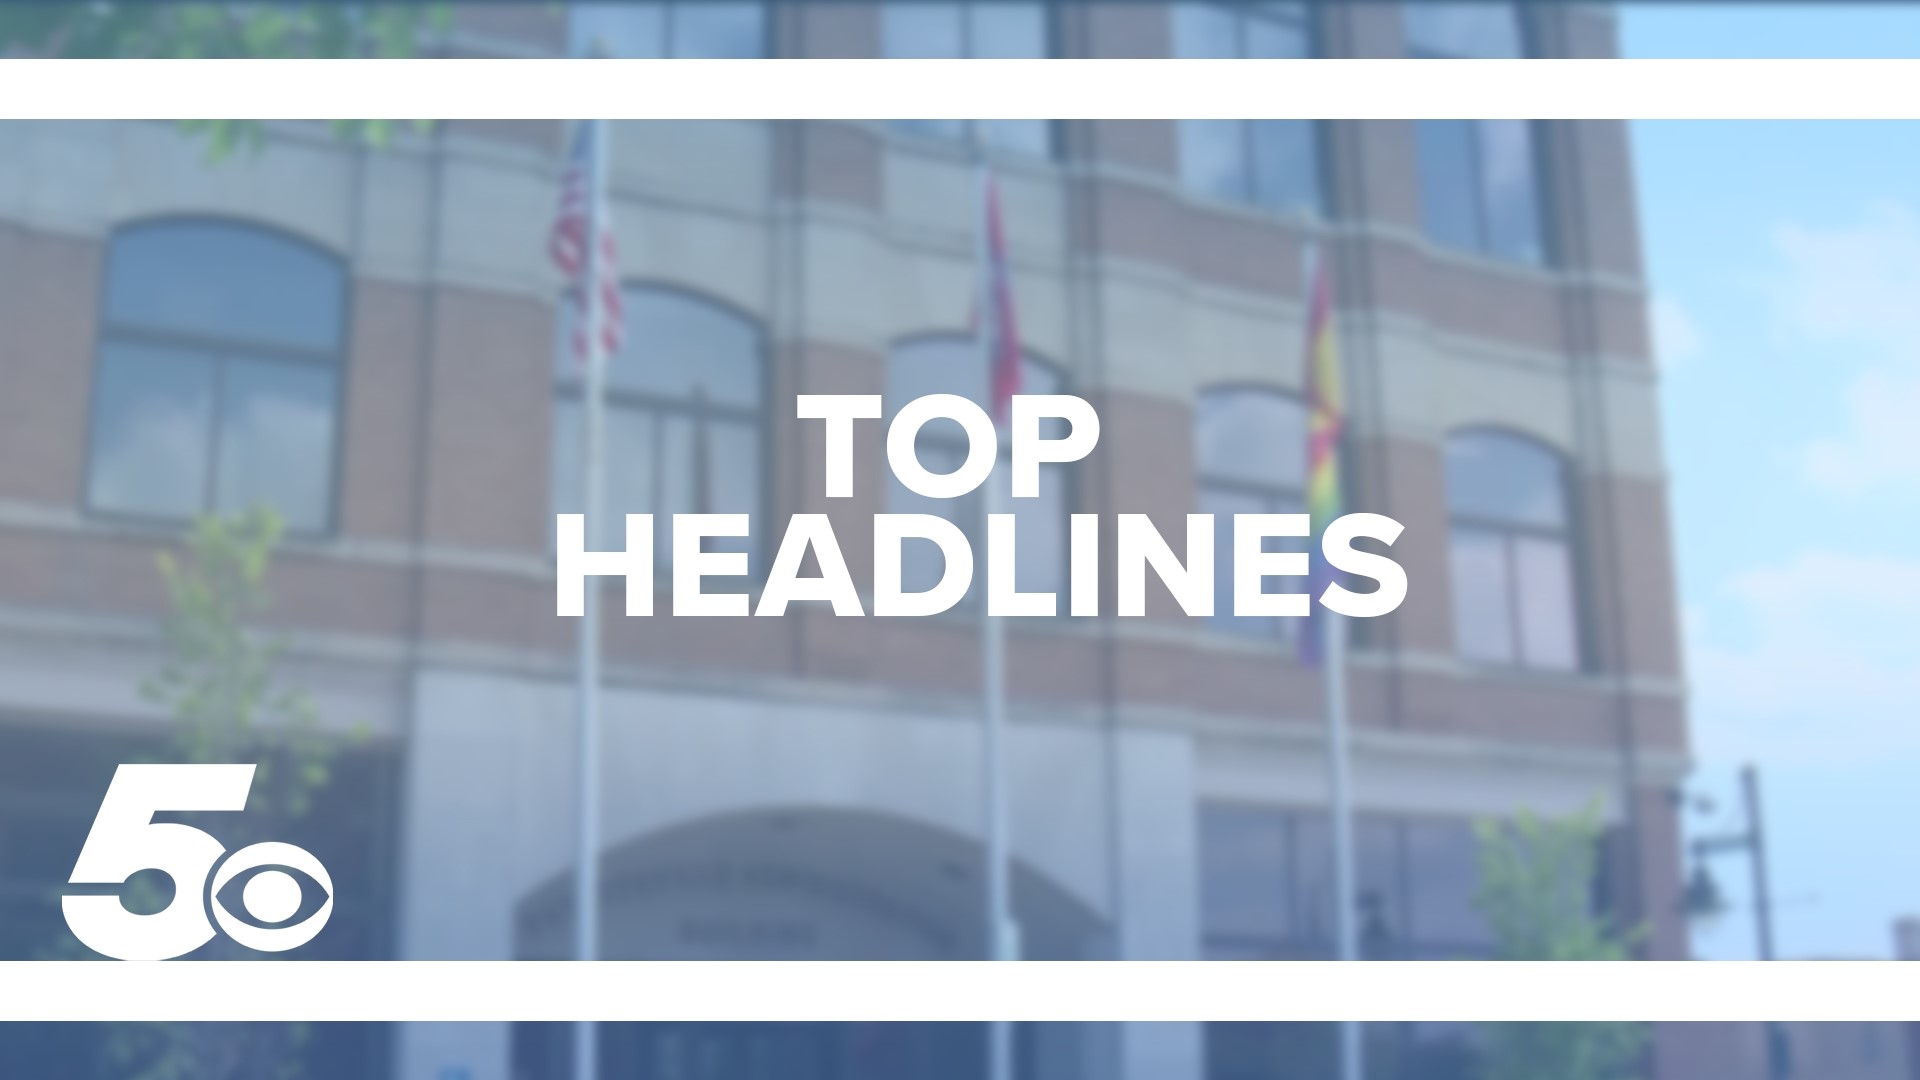 Check out today's top headlines, including weather, remembering an Arkansas athlete, and more.